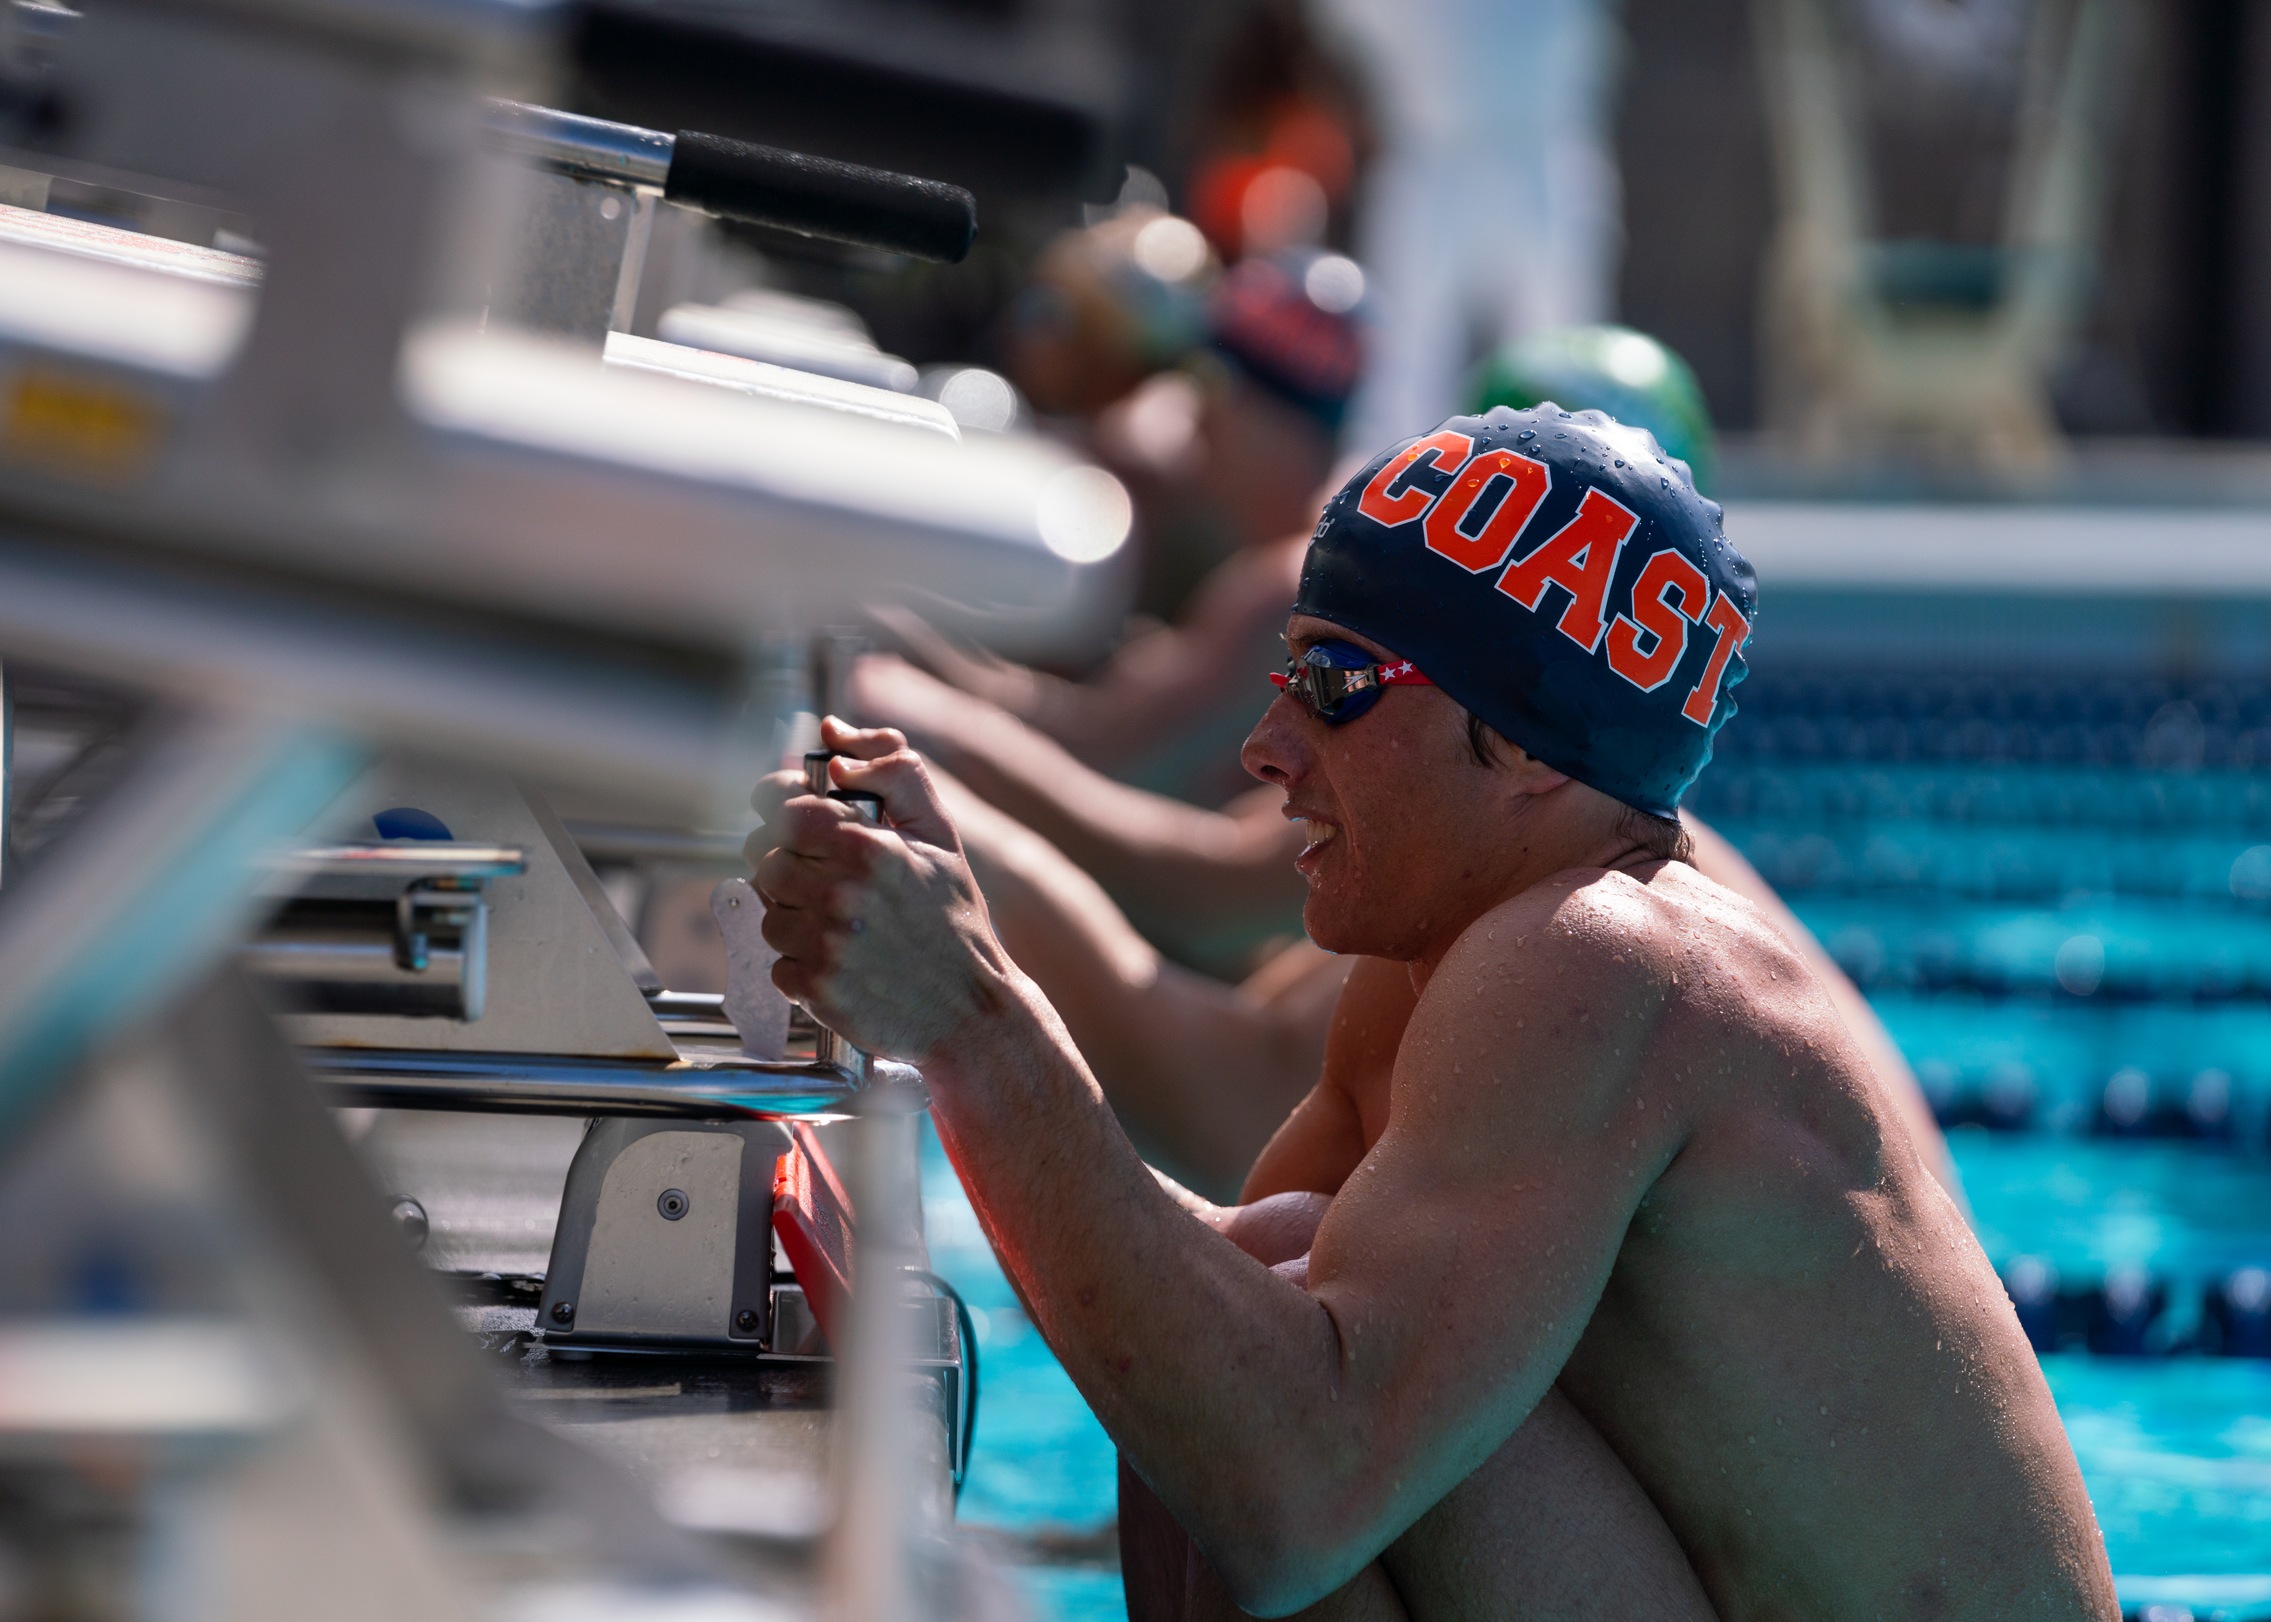 Pirates looking to make history at swim/dive state finals